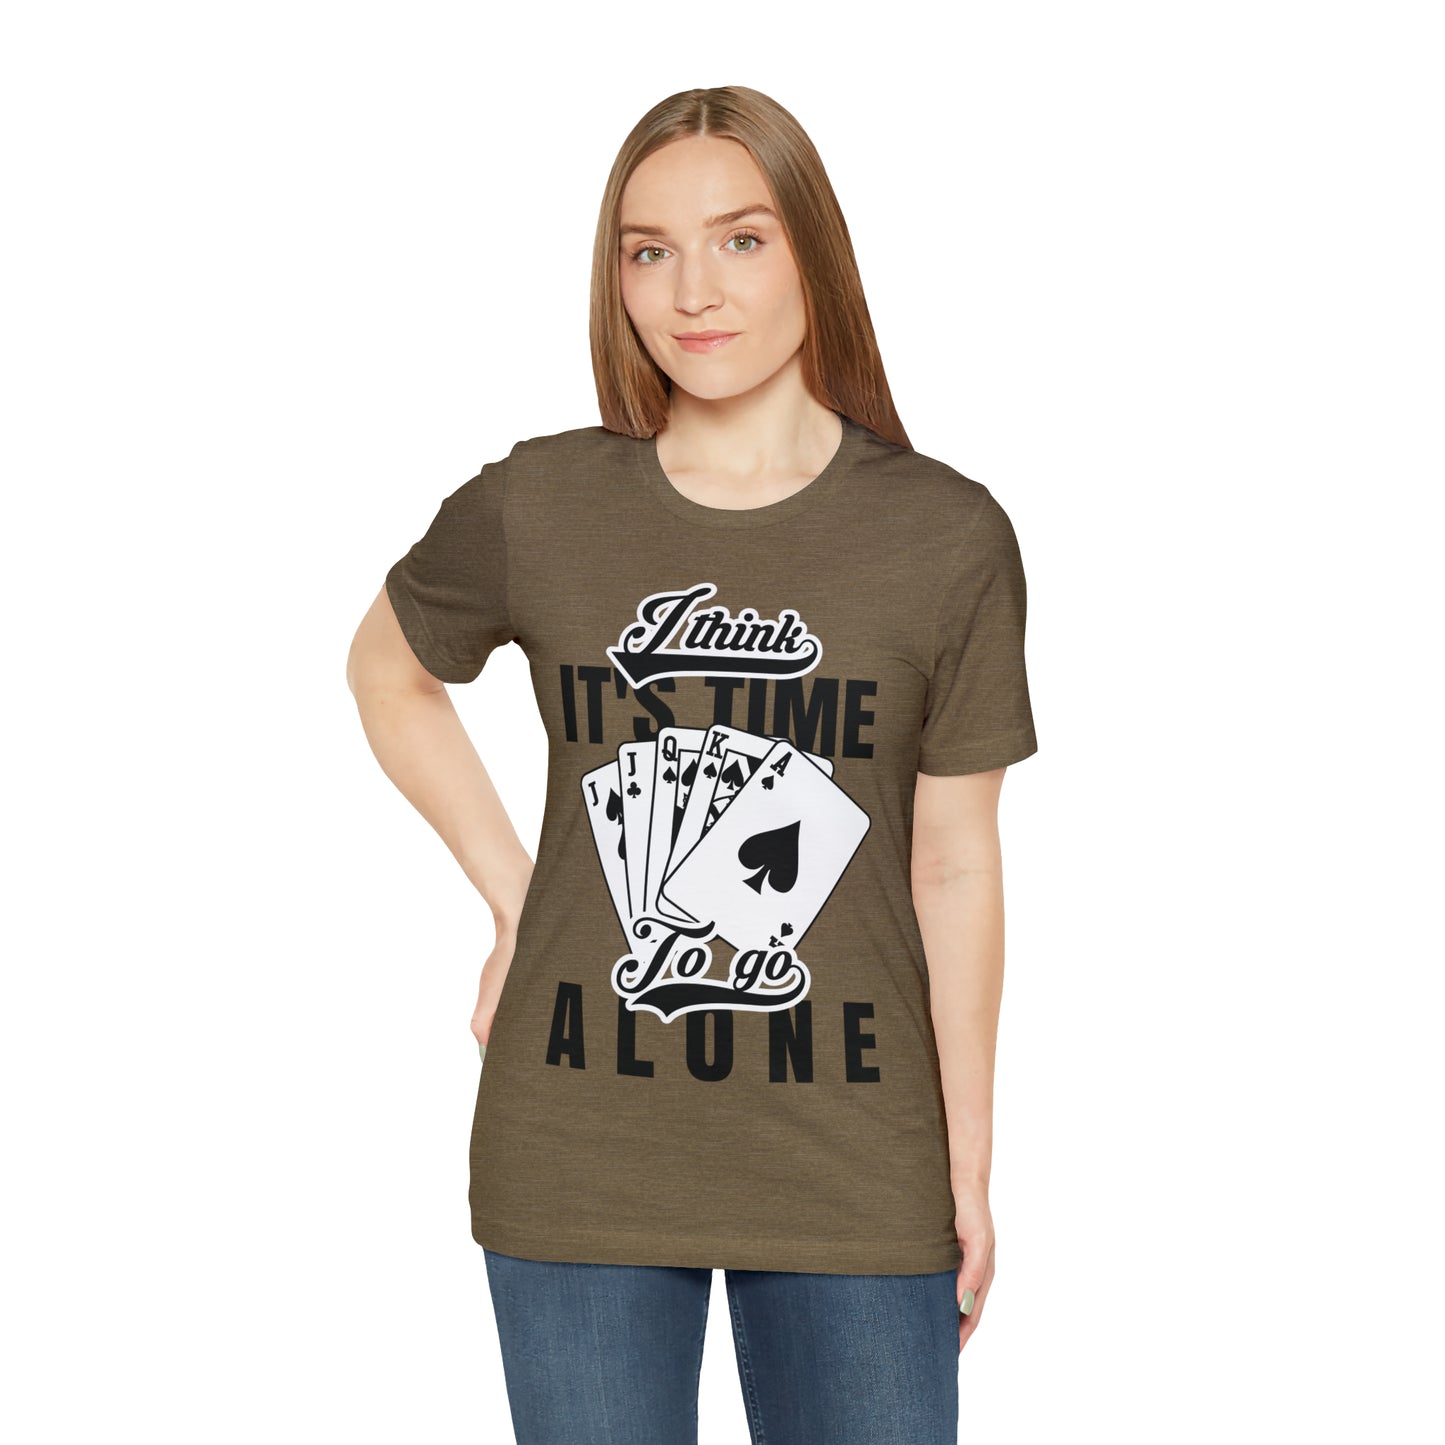 "I Think It's Time To Go Alone" Euchre T-Shirt